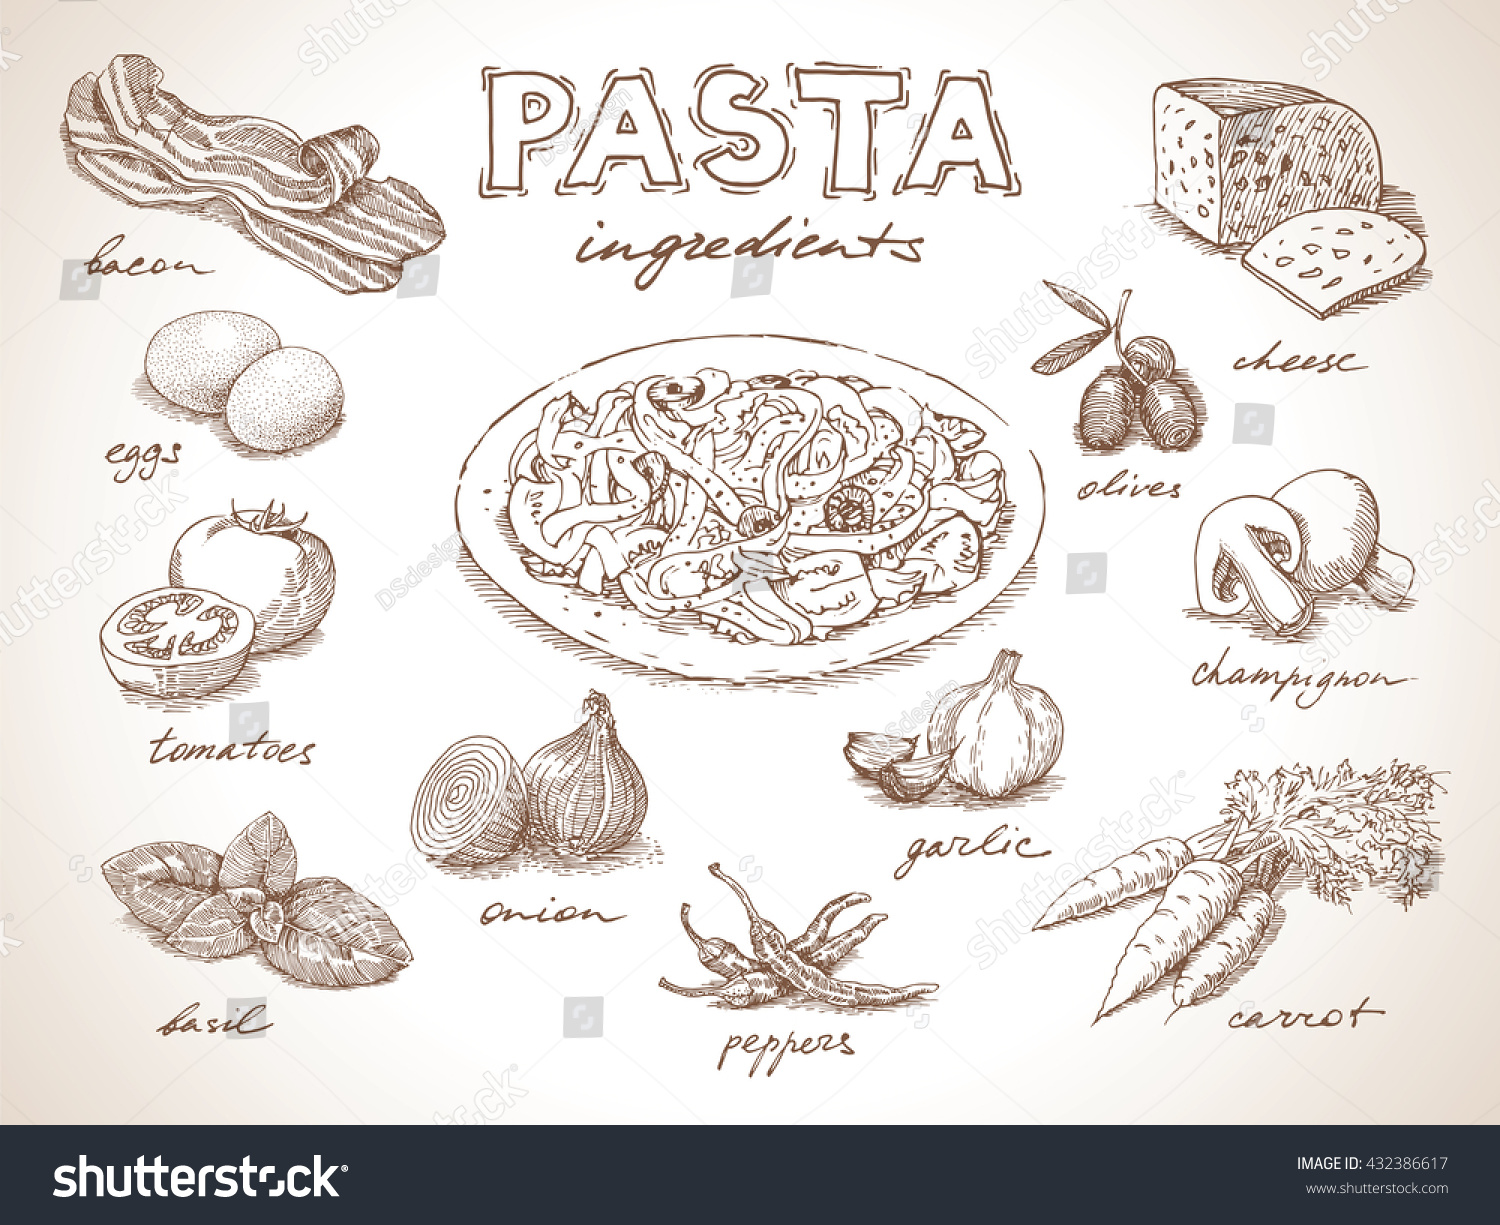 Pasta With Ingredients Free Hand Drawing, Sketch Style Stock Vector ...